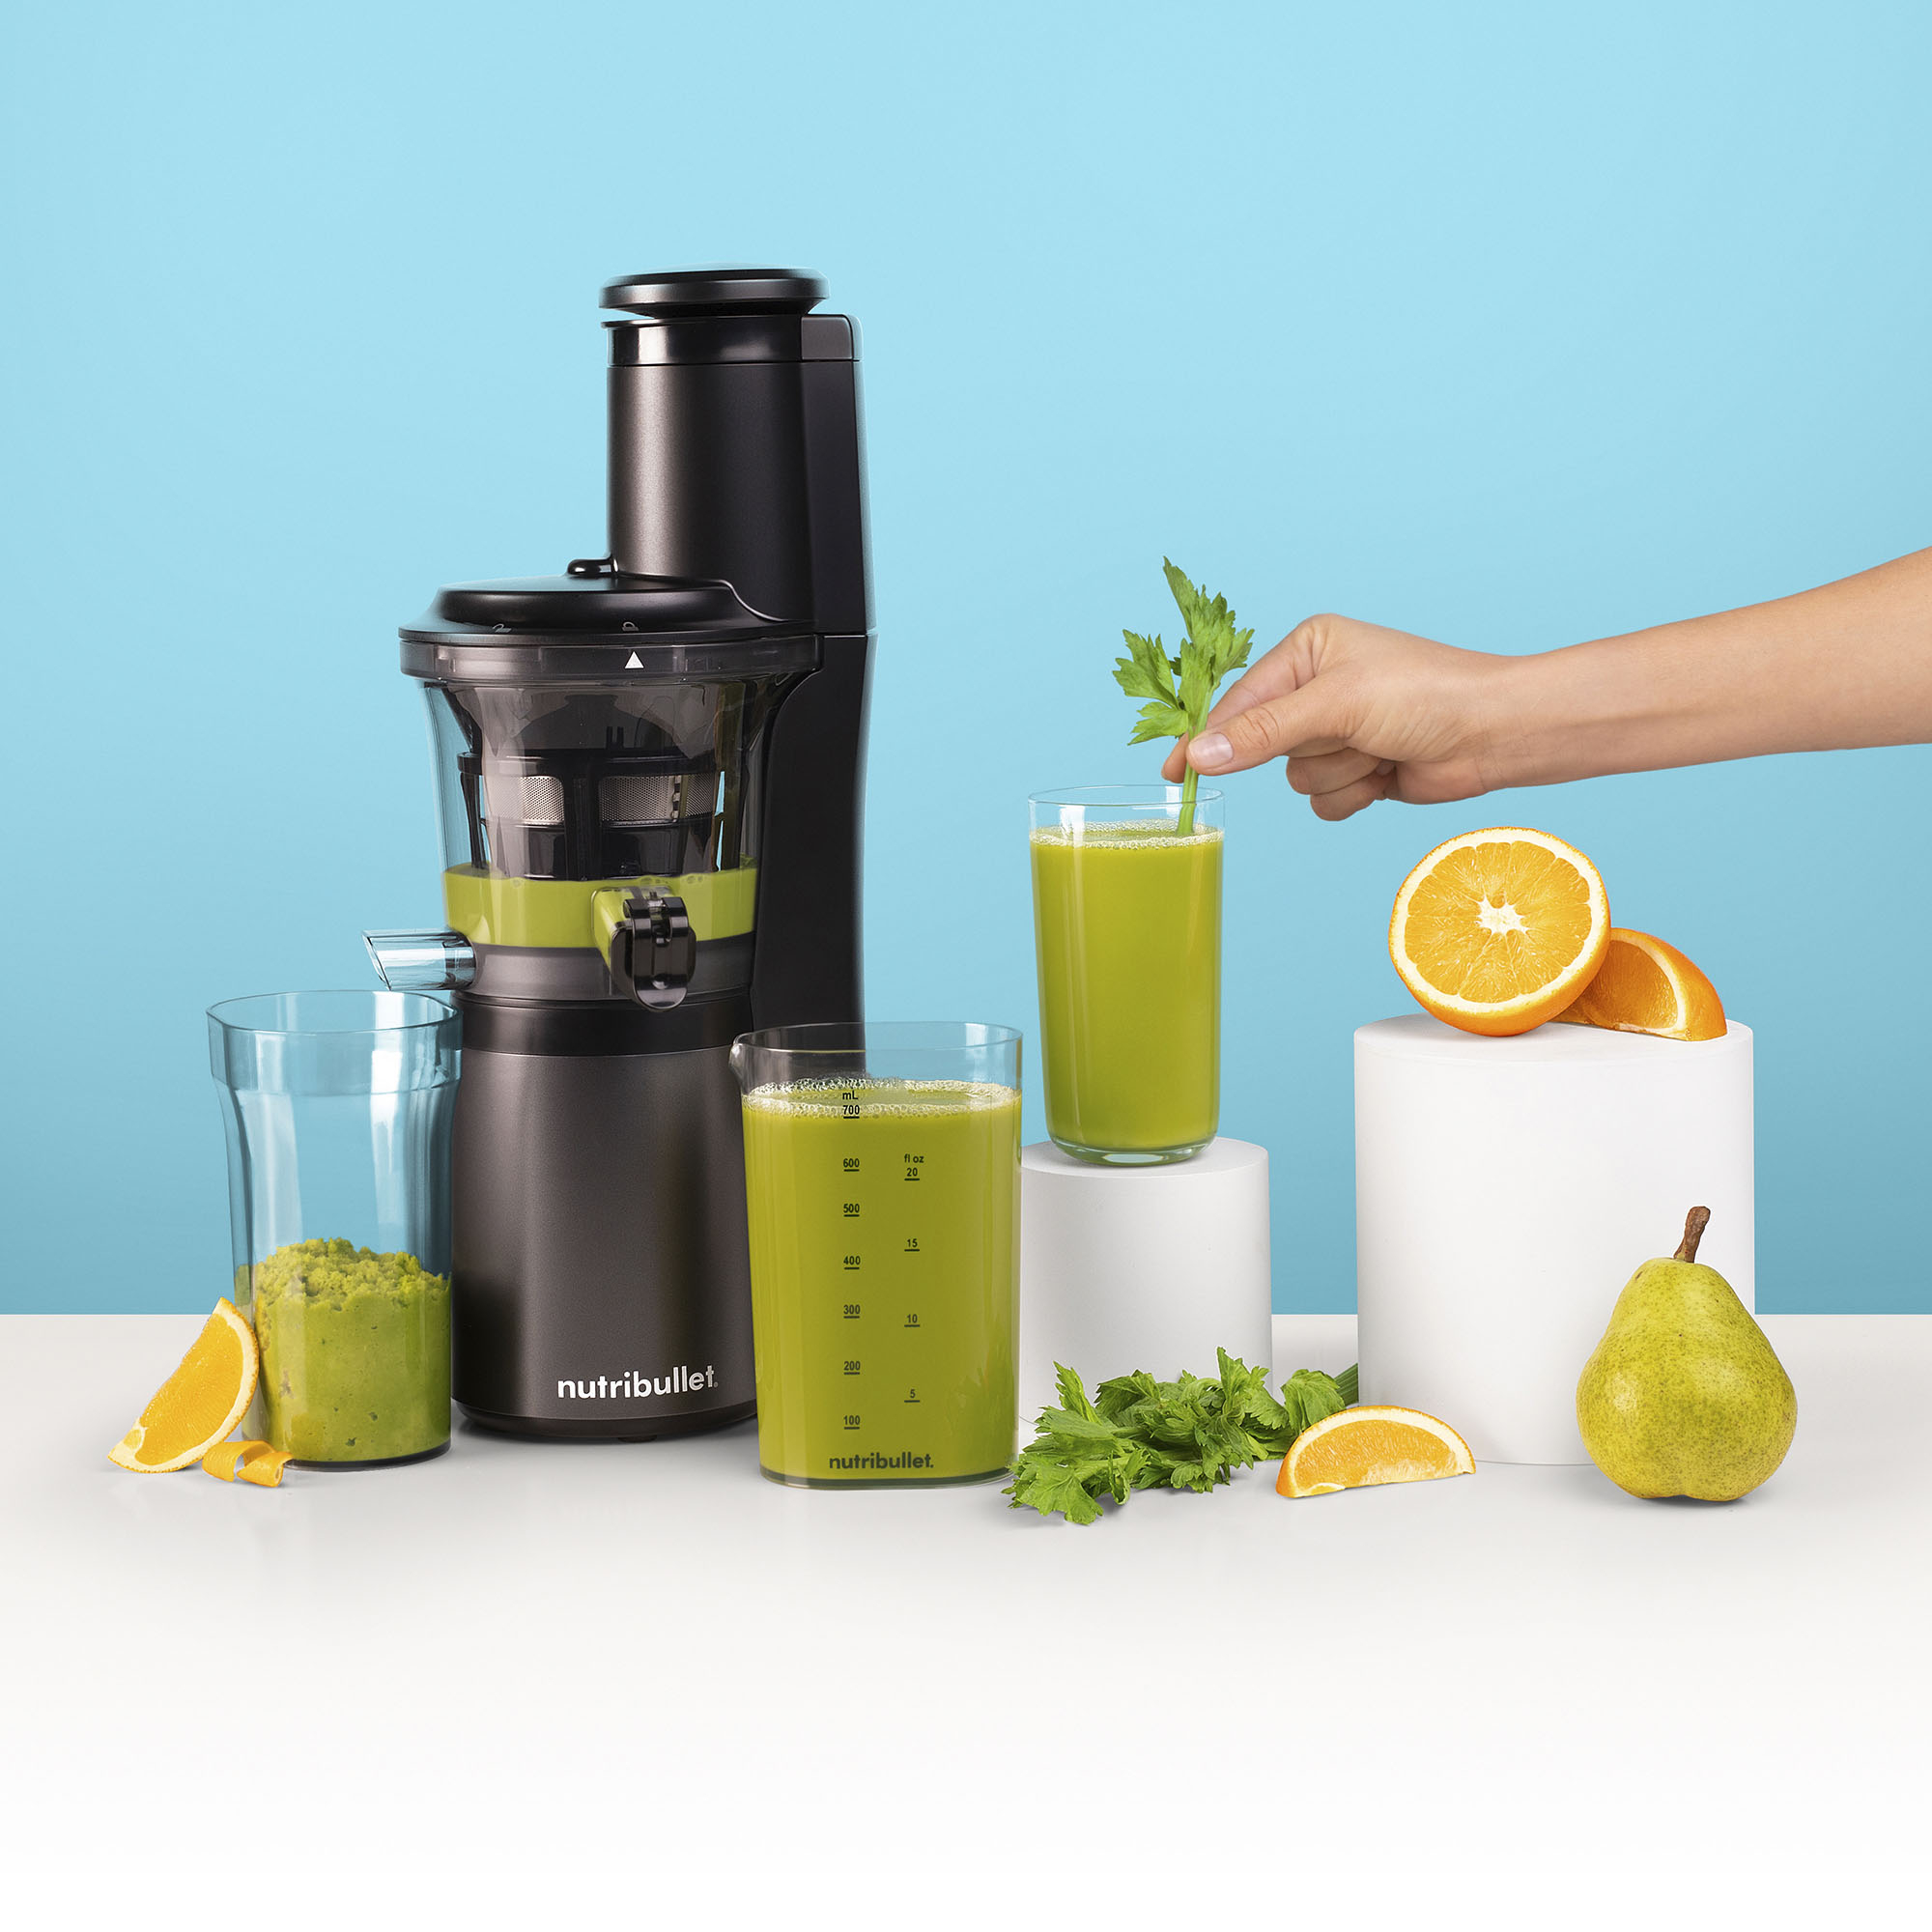 Masticating Juicers: The Gold Standard for Nutrient-Rich Juice